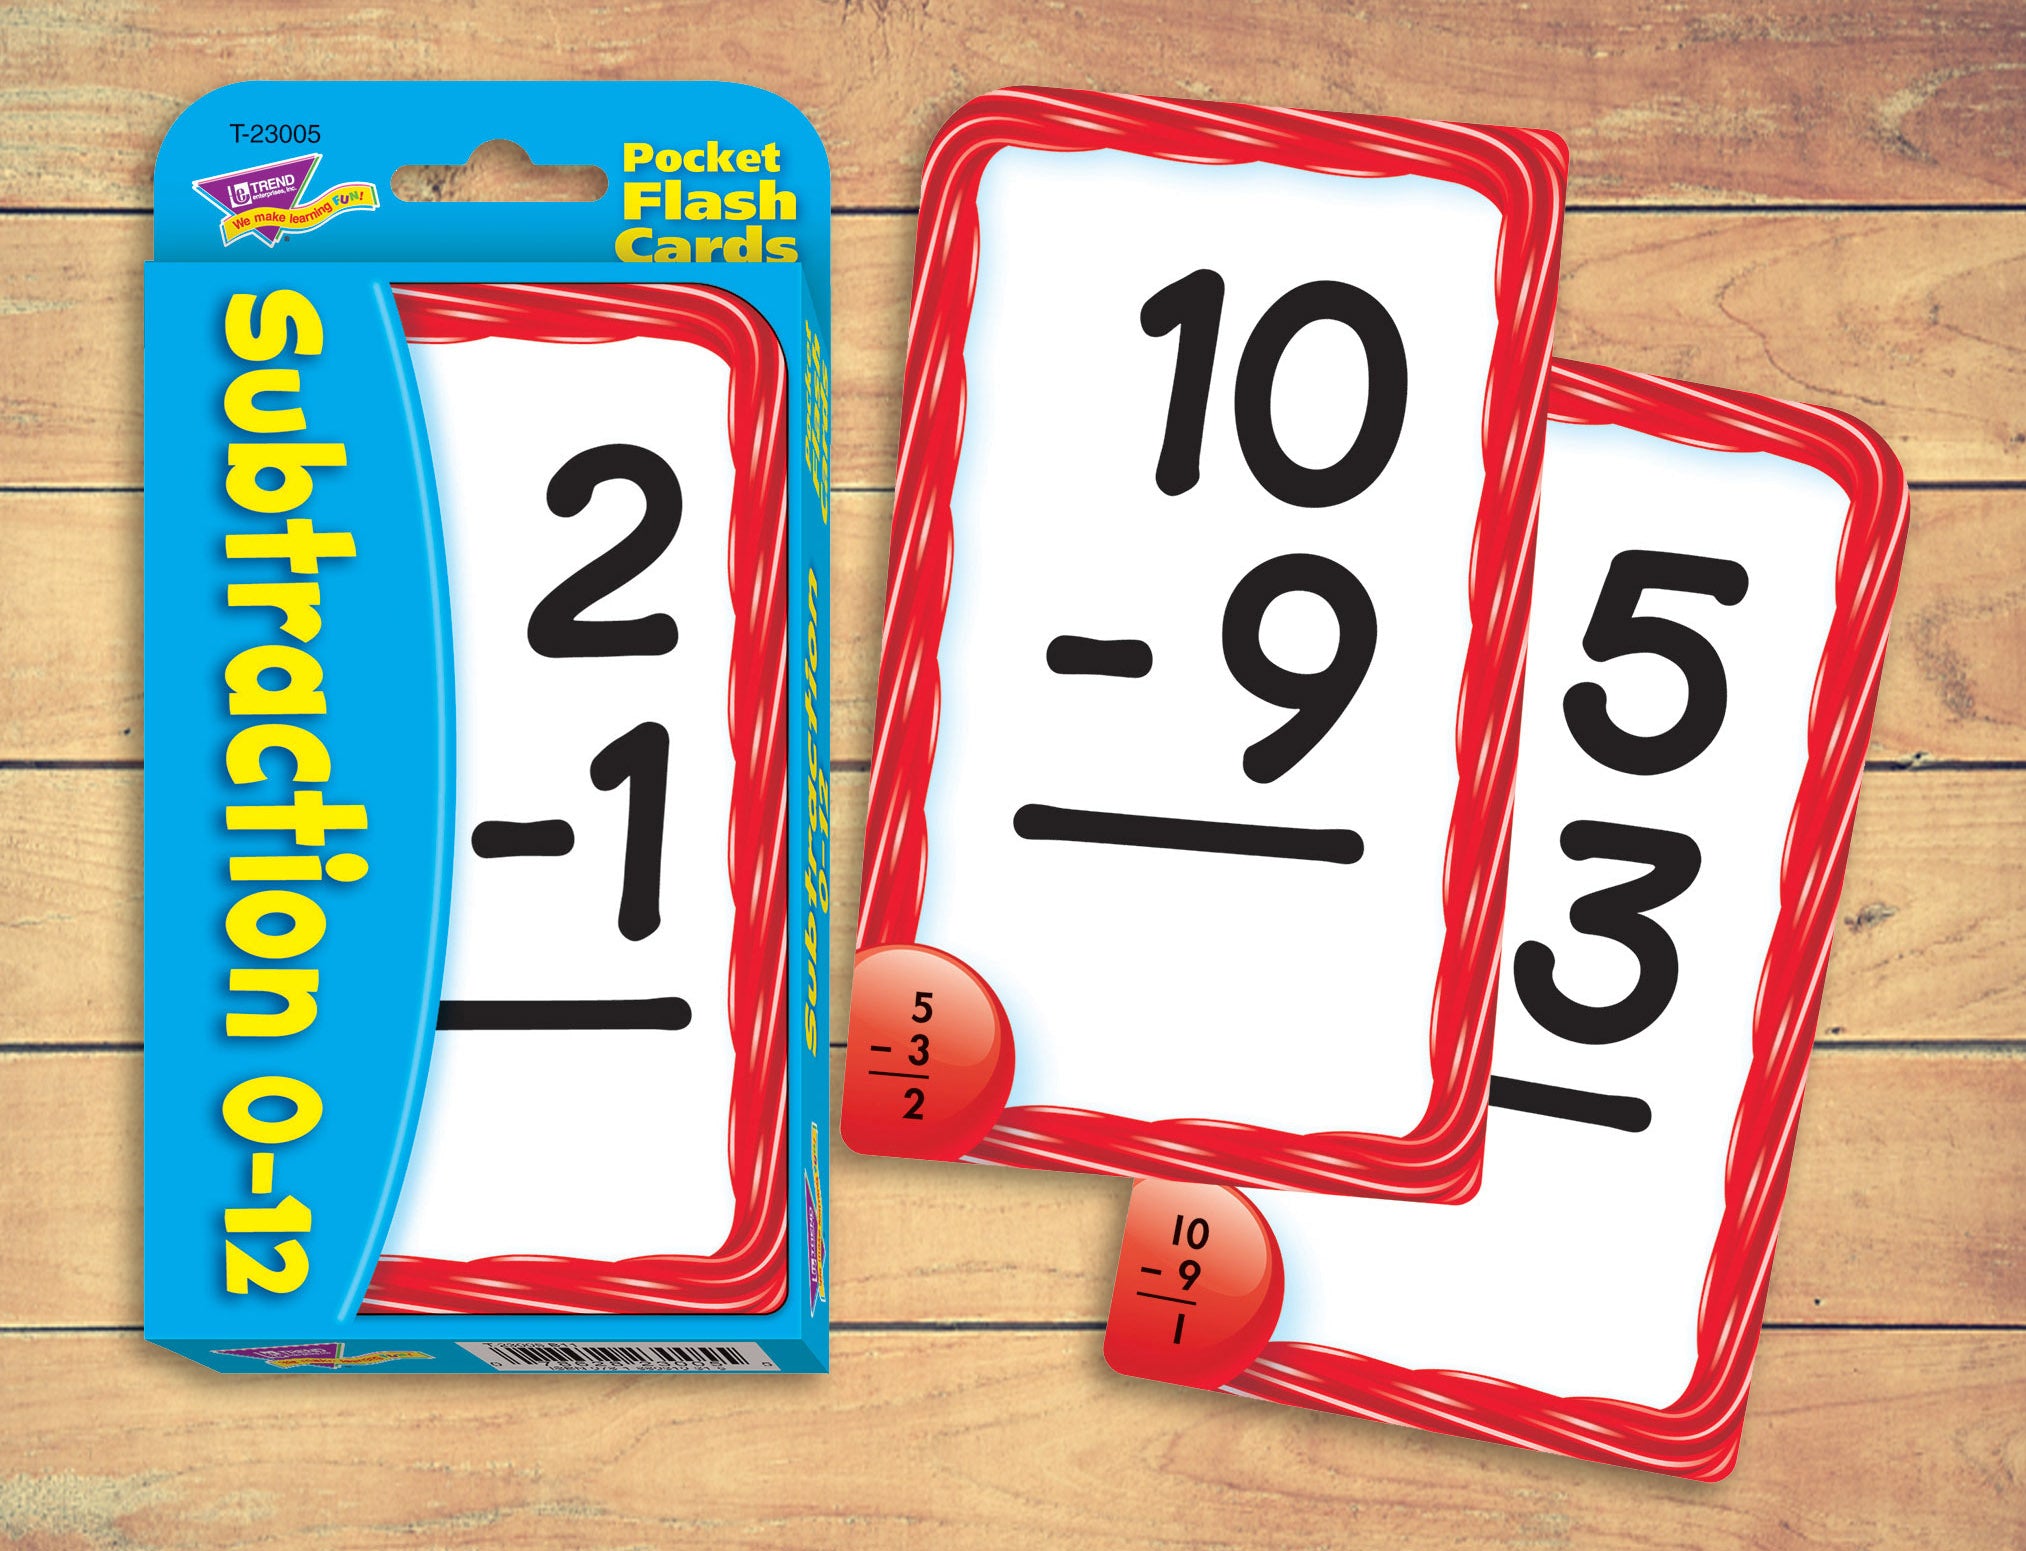 Subtraction flash cards for at home distance learning school teacher supplies made in USA